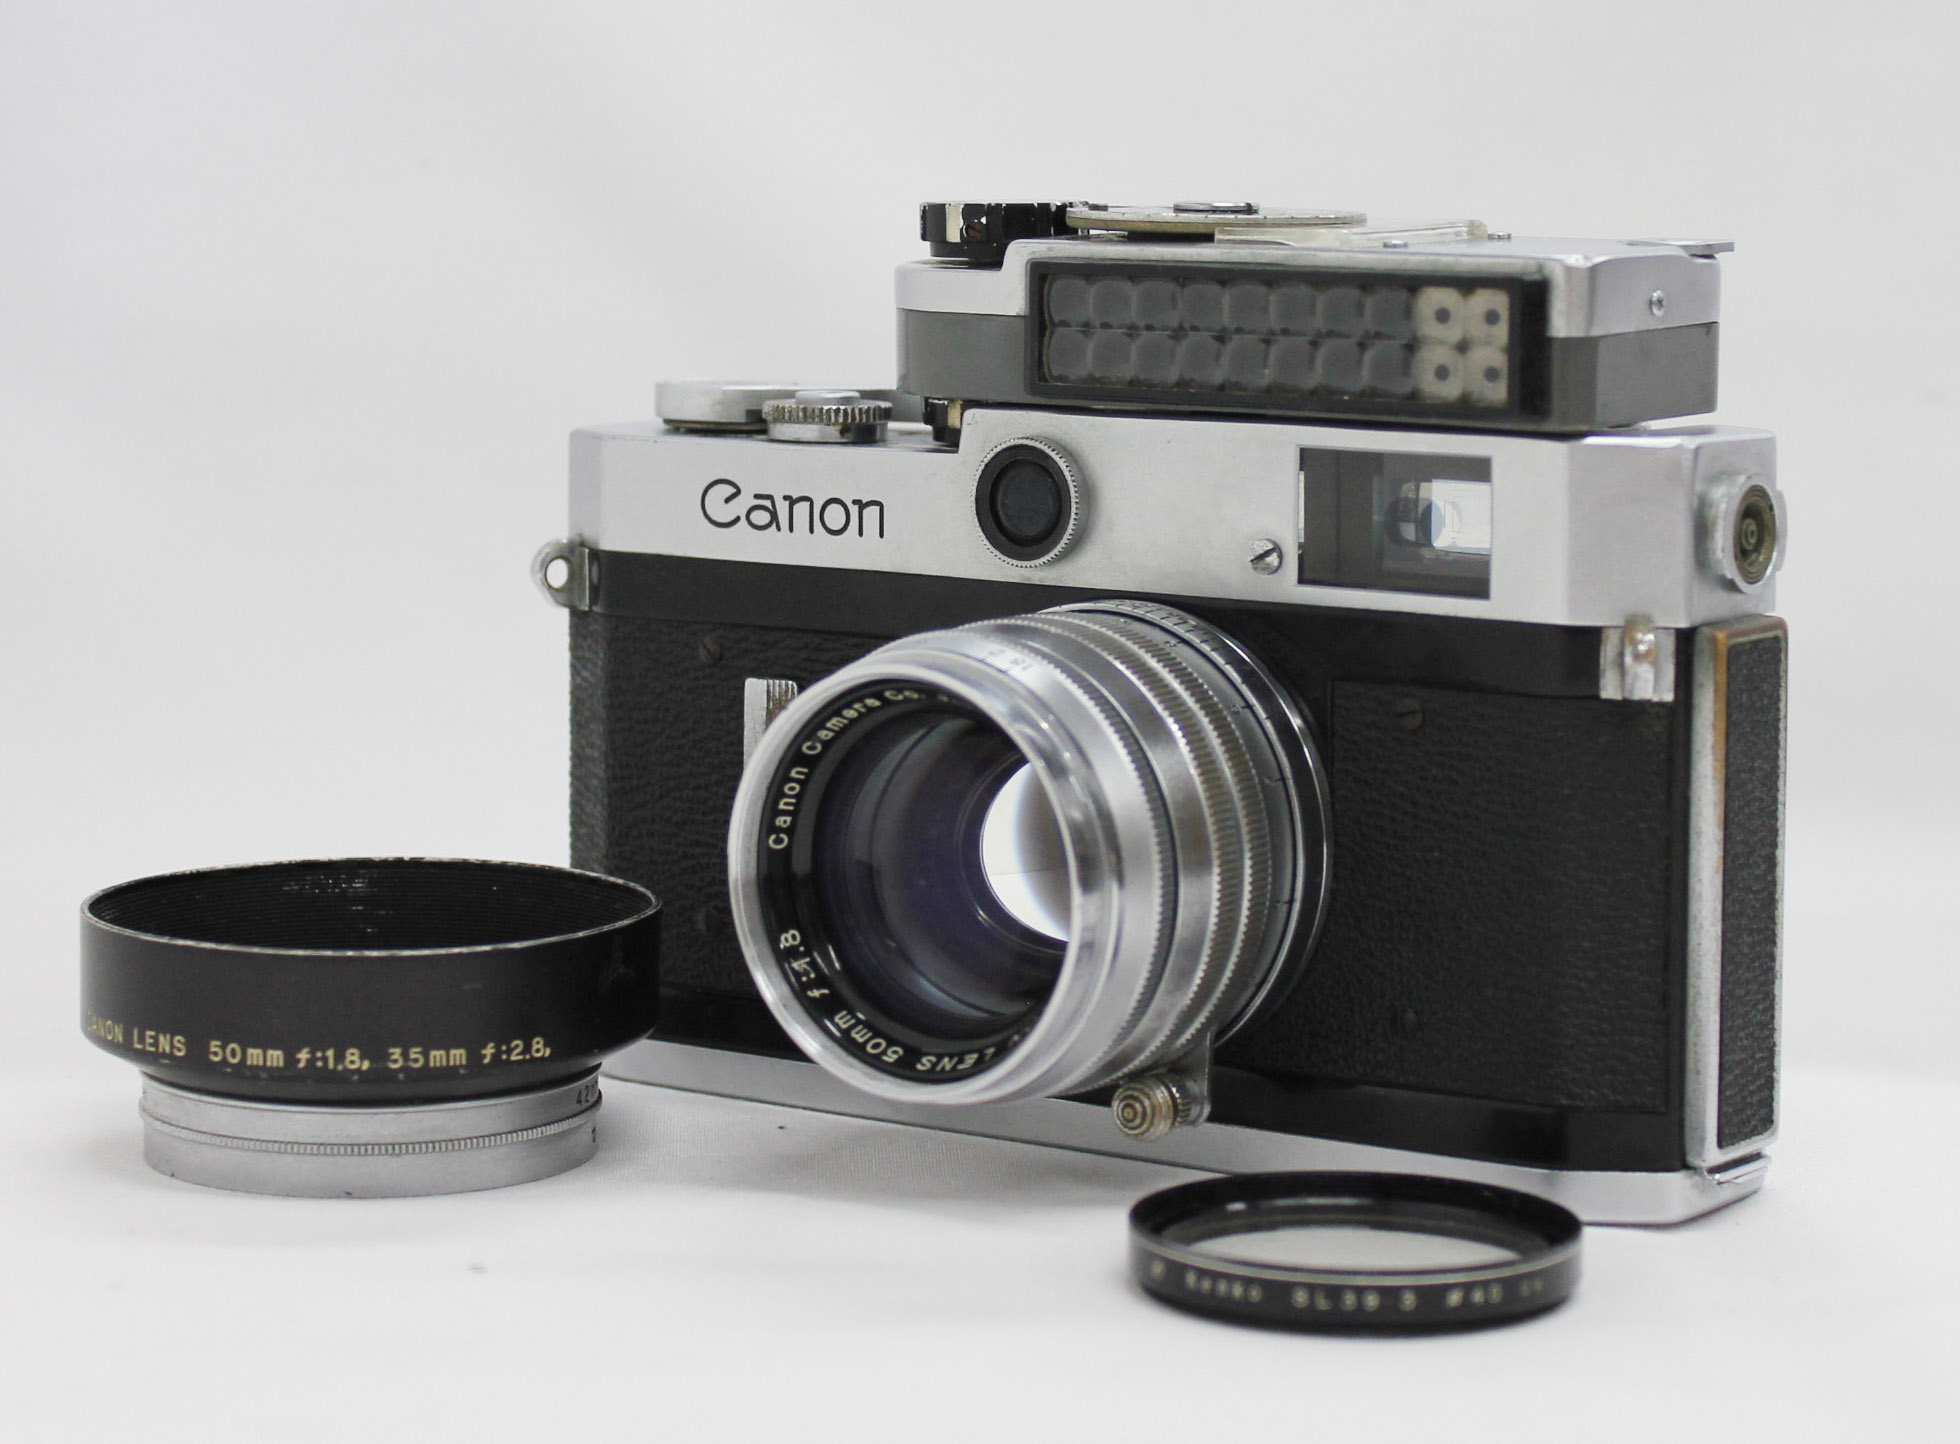 Japan Used Camera Shop | Canon P Rangefinder 35mm Film Camera with 50mm F/1.8 & Meter from Japan